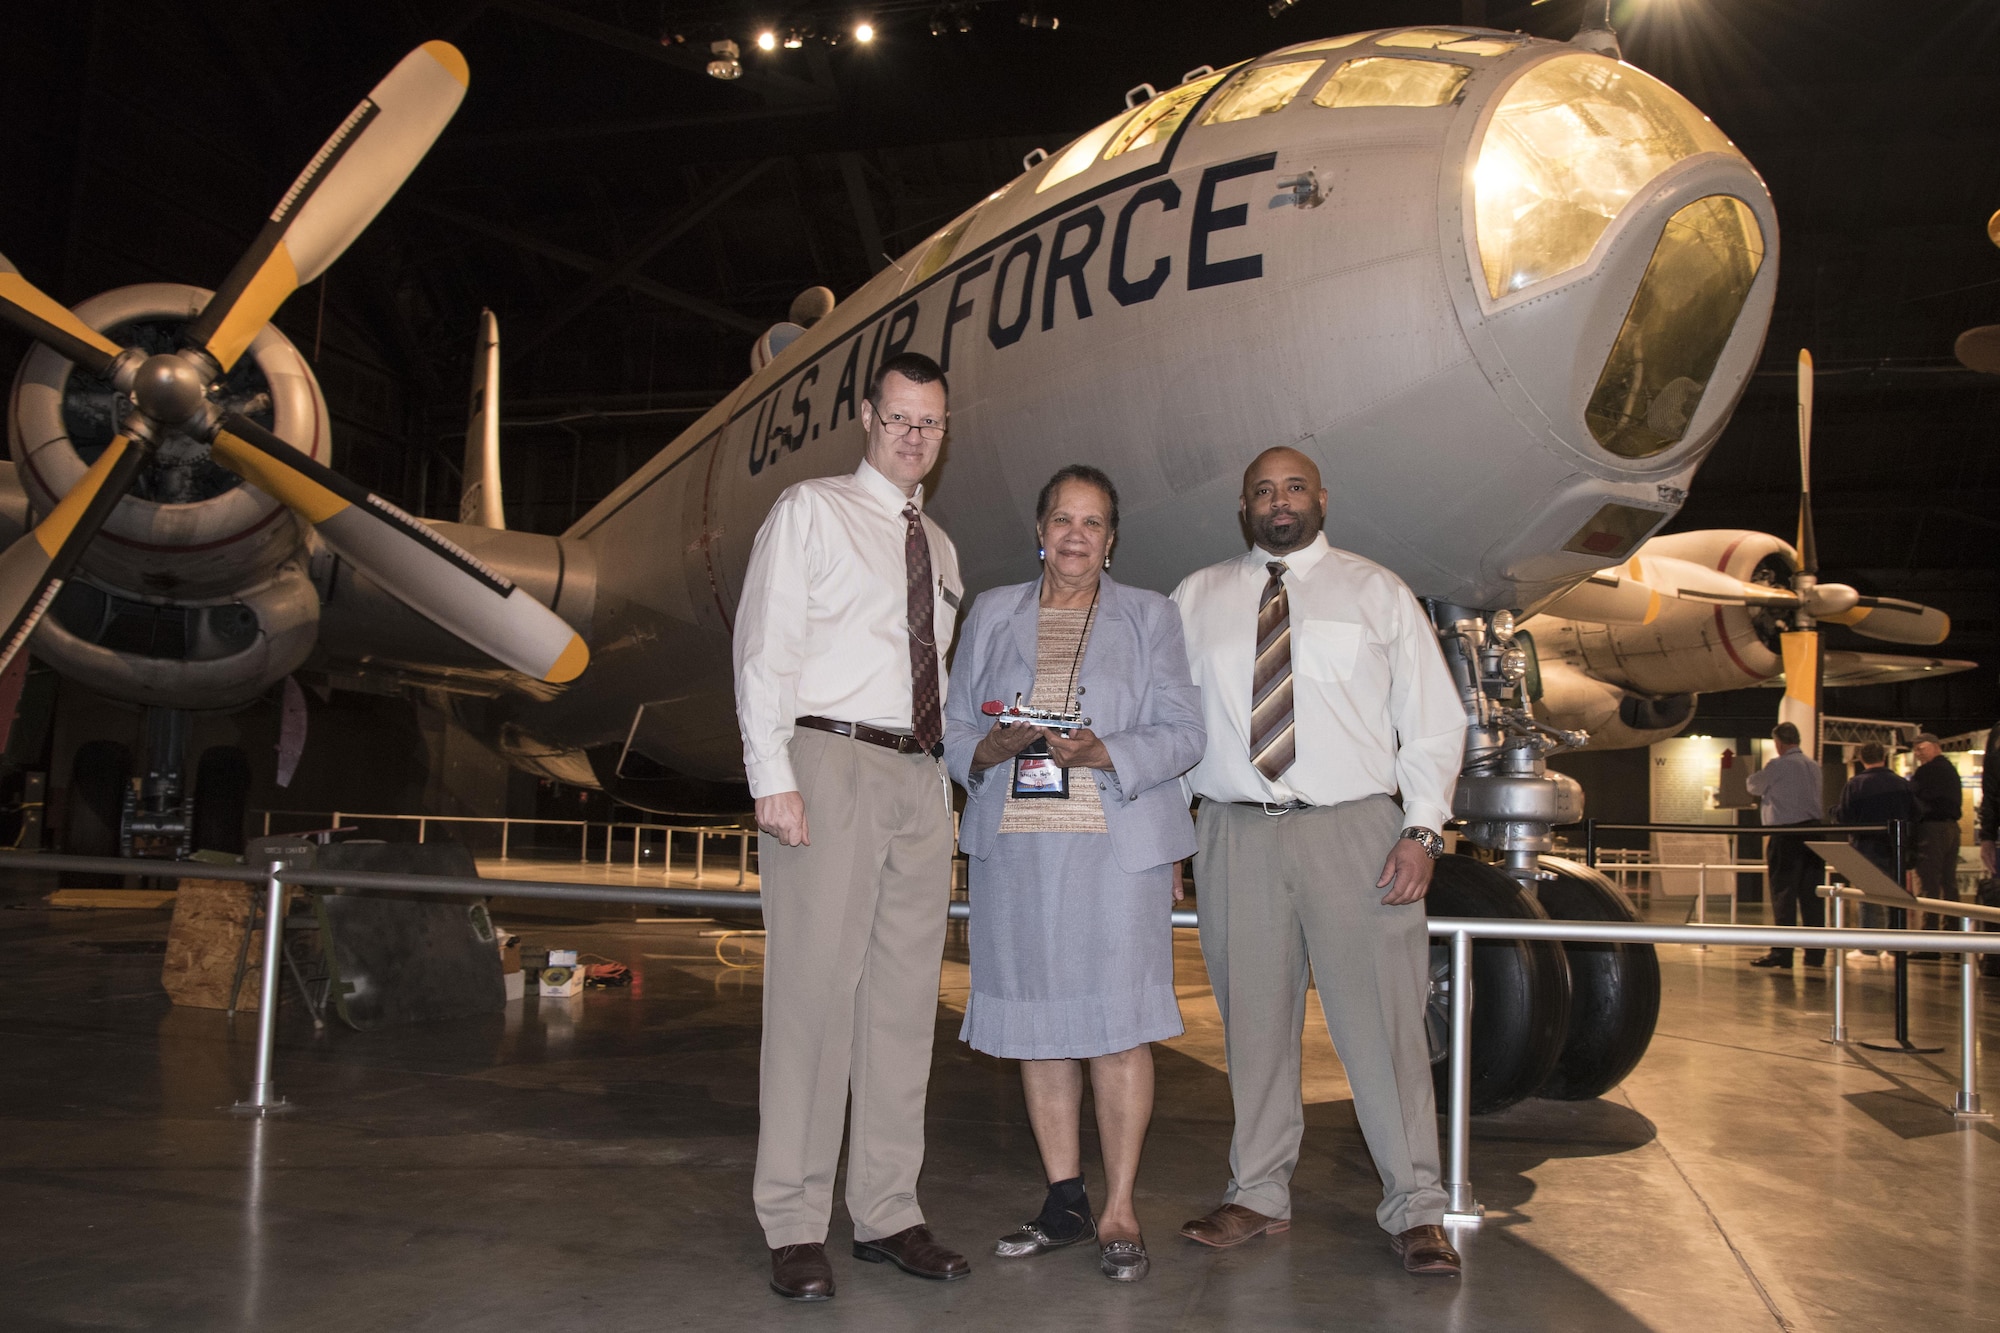 DAYTON, Ohio -- Patricia Paytee and son Terence Paytee donated a Morse code key on Sept. 29, 2016 at the National Museum of the U.S. Air Force. Museum Historian Dr. Doug Lantry accepted the donation on behalf of the museum. (U.S. Air Force photo)